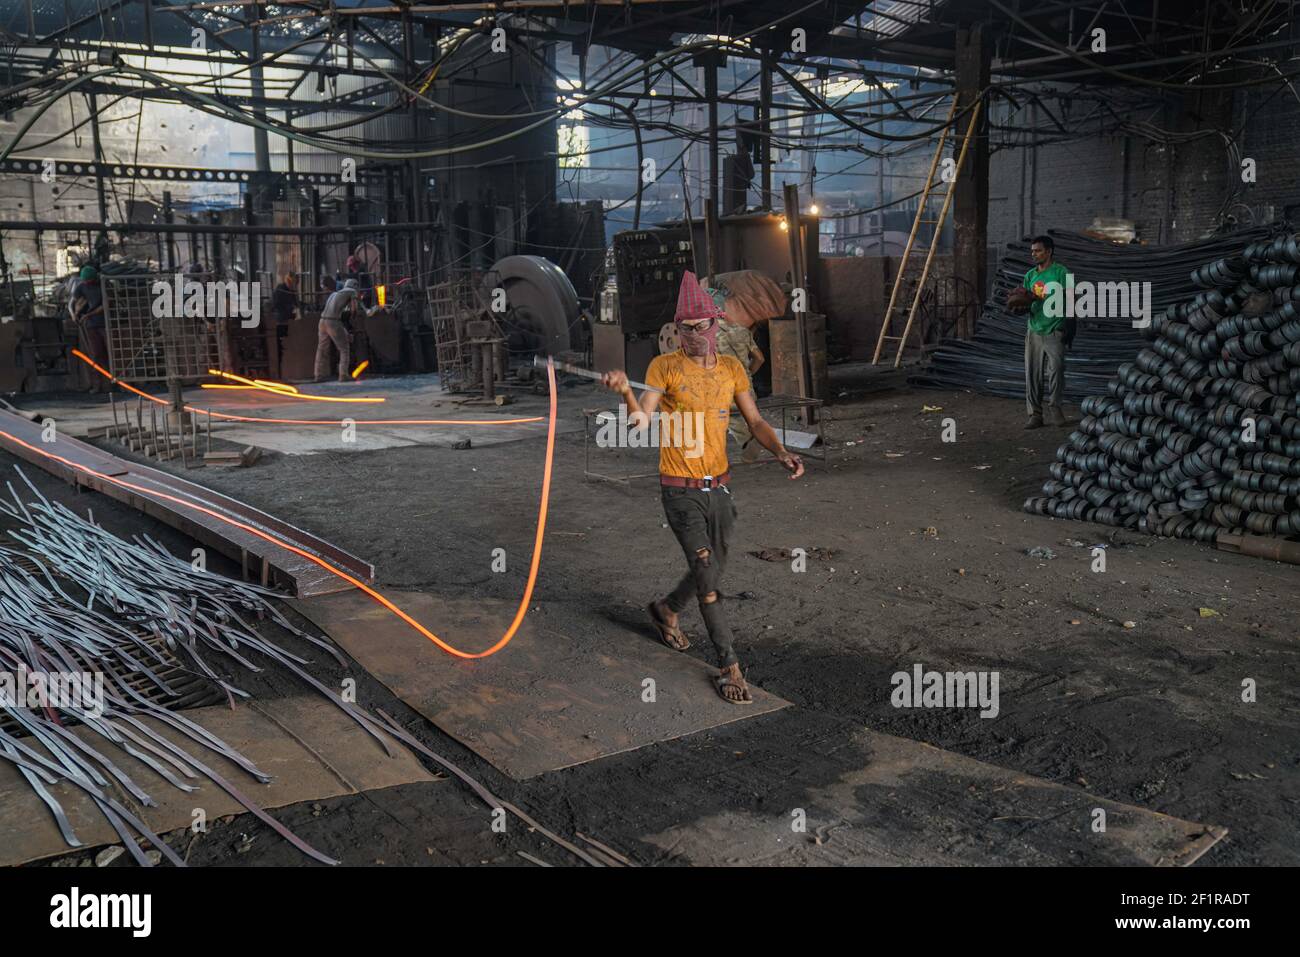 Dhaka, Dhaka, Bangladesh. 9th Mar, 2021. A rolling mill worker seen working in the steel re-rolling mill without proper safety gear or tools in Dhaka, Bangladesh on March 9, 2021. Credit: Zabed Hasnain Chowdhury/ZUMA Wire/Alamy Live News Stock Photo